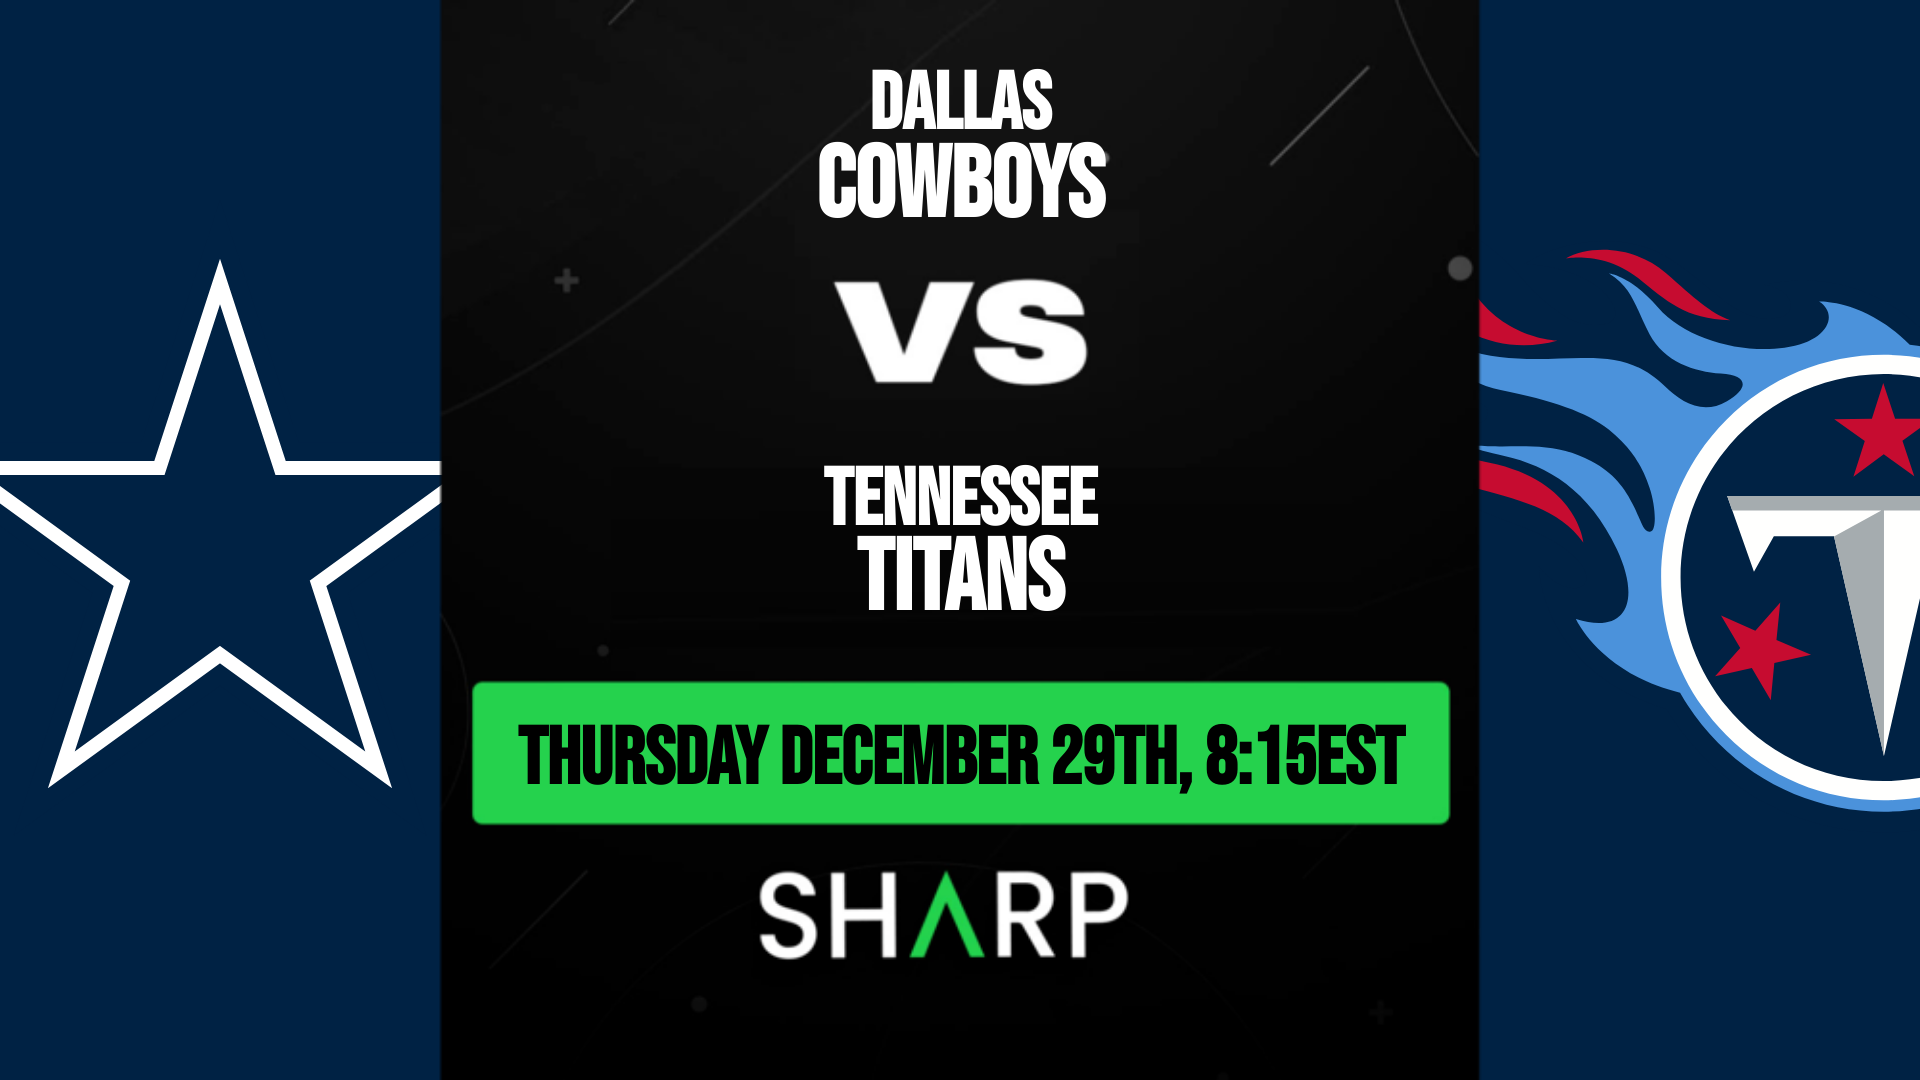 Dallas Cowboys vs Tennessee Titans Matchup Preview - December 29th